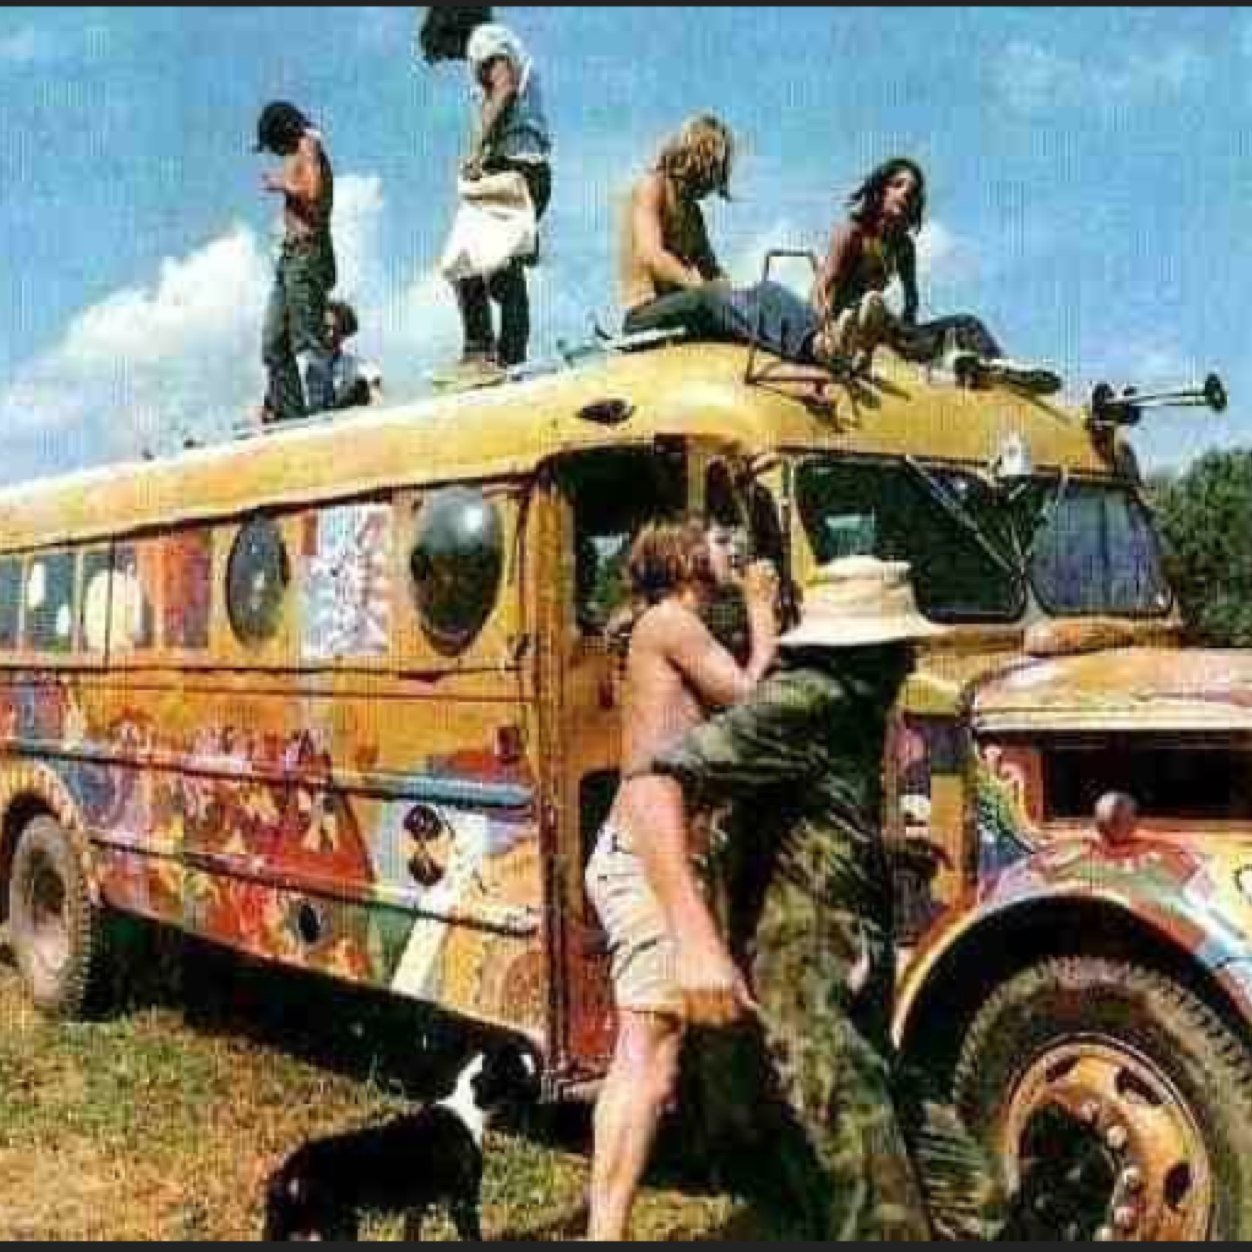 Bringin' back the golden age Hippies ! #StonersUnited Keeping smoking My Friends, Follow us if you love weed also if youre a hippie/stoner ! Good vibes :) !